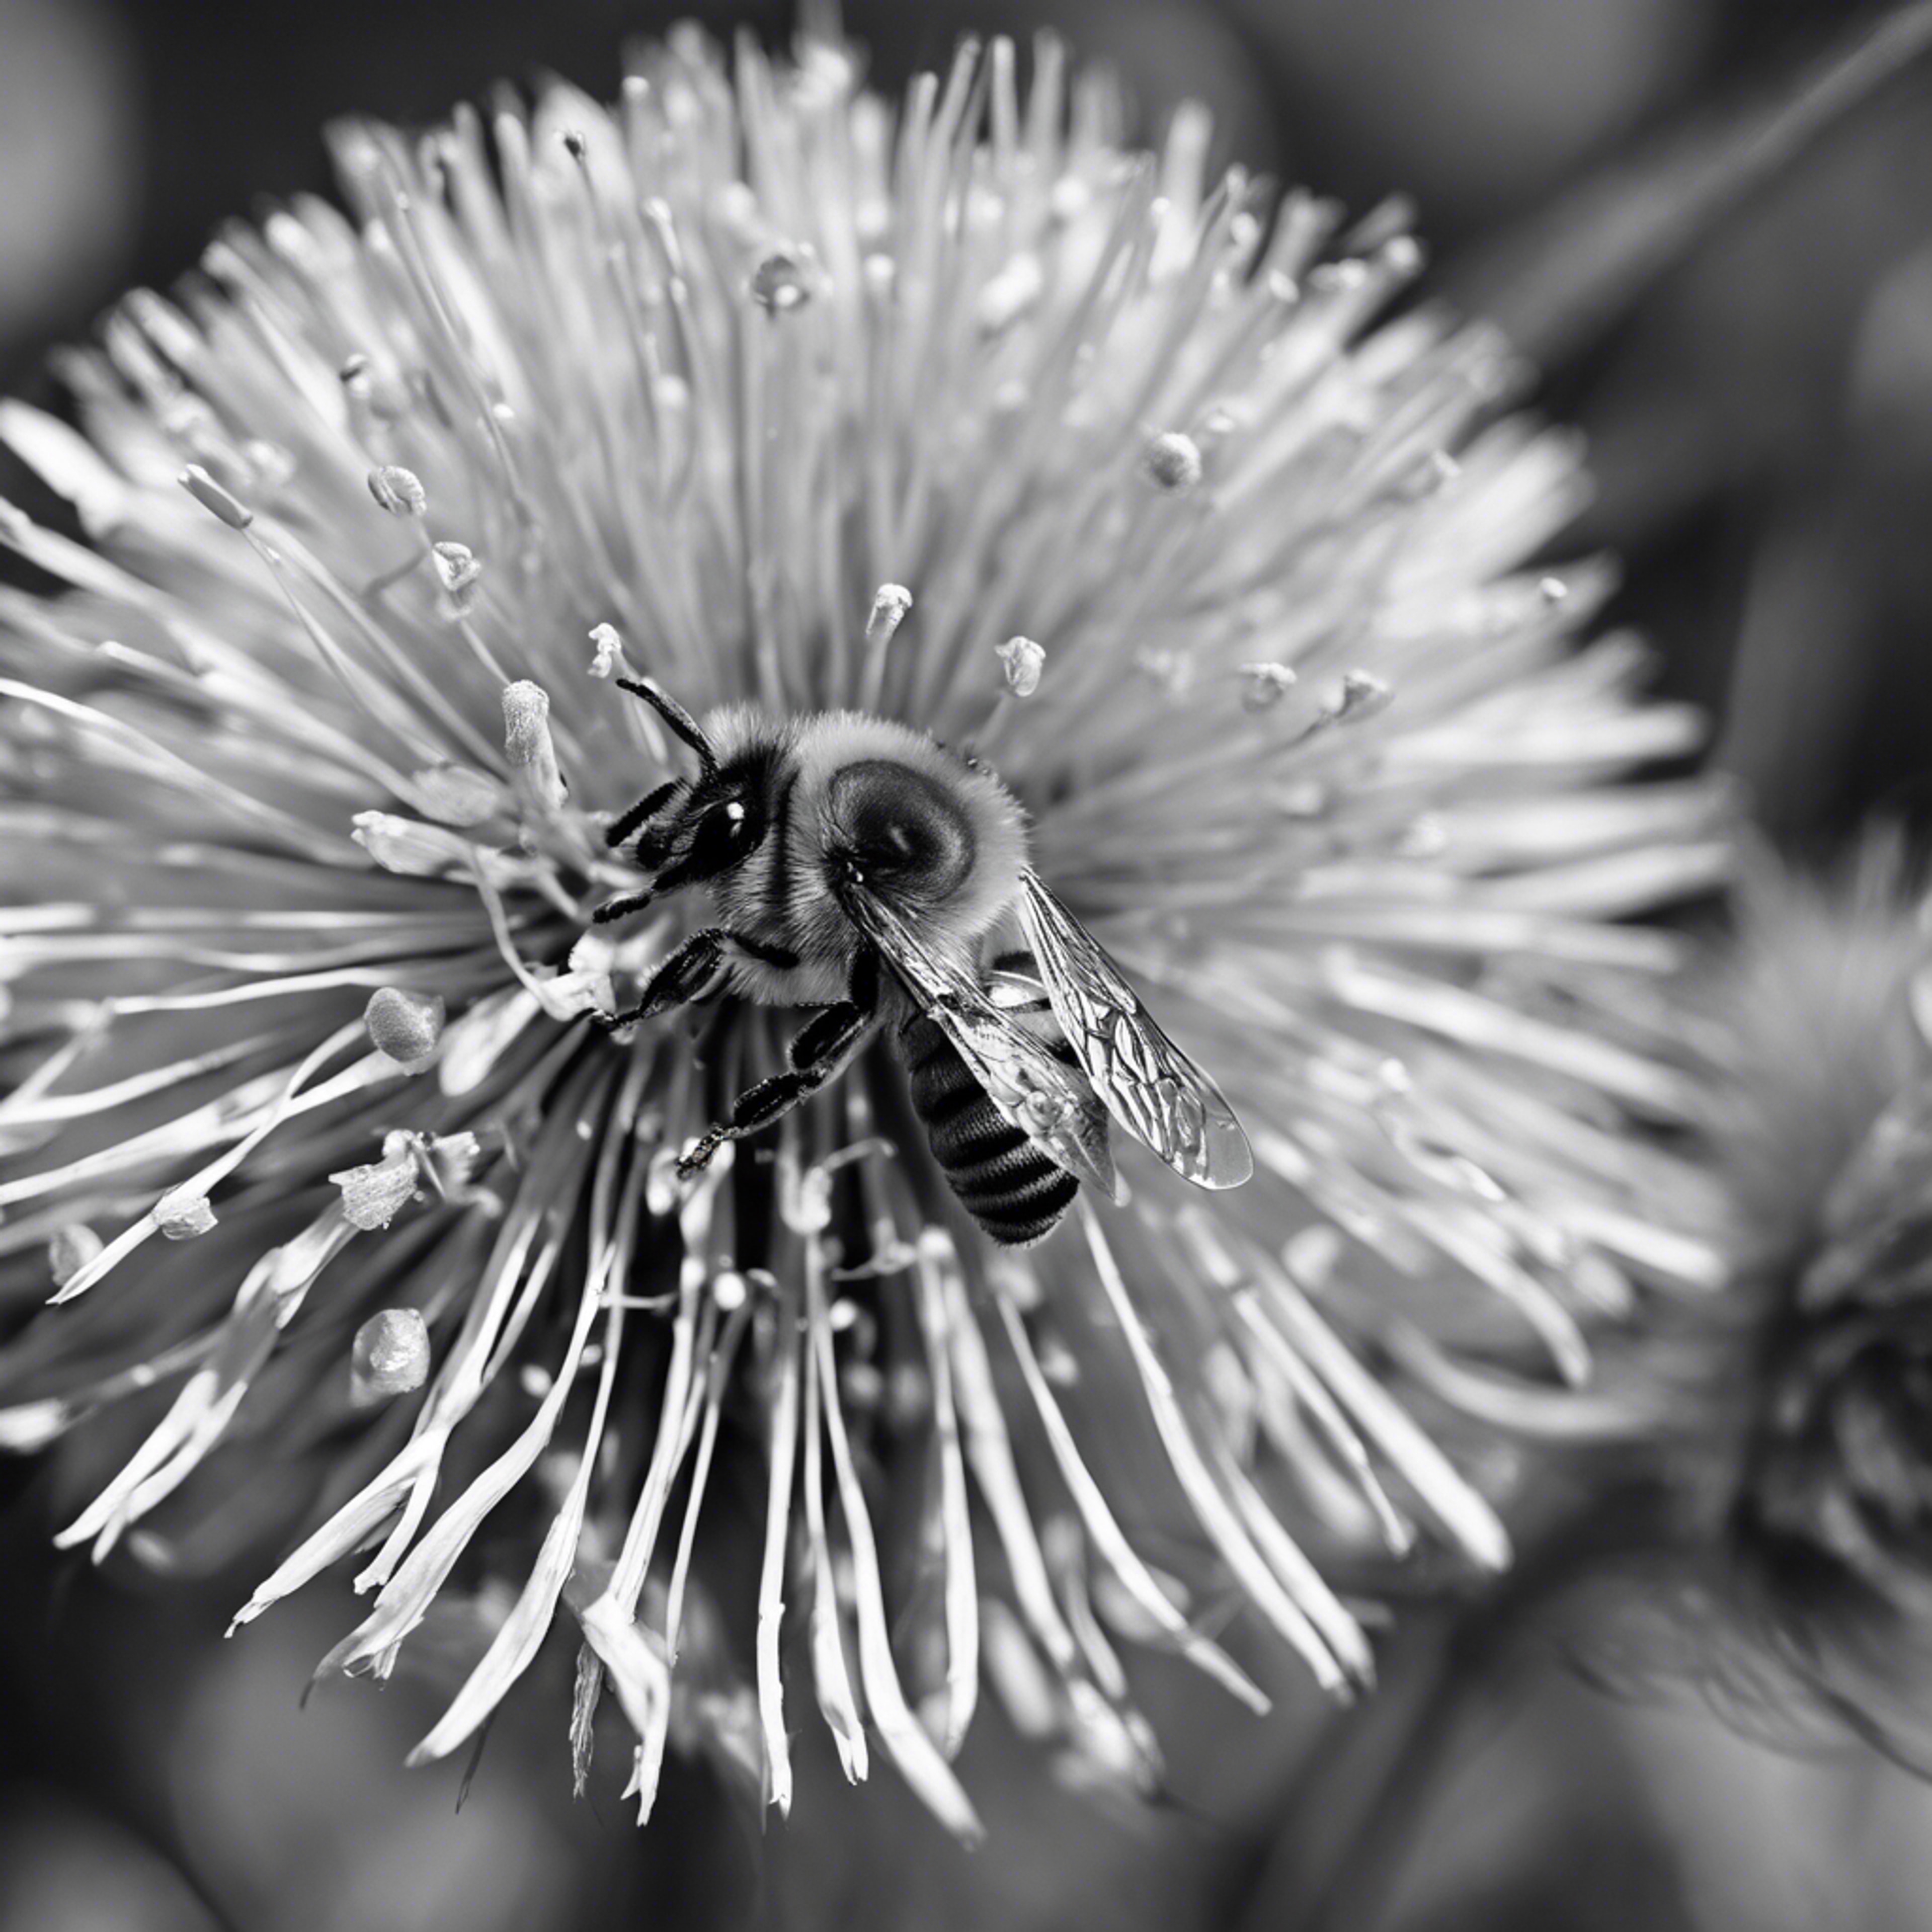 A dramatic, high contrast black and white image of a bee greedily gathering nectar from a blooming dandelion.壁紙[1aed7d23f0dd4ebdba5a]